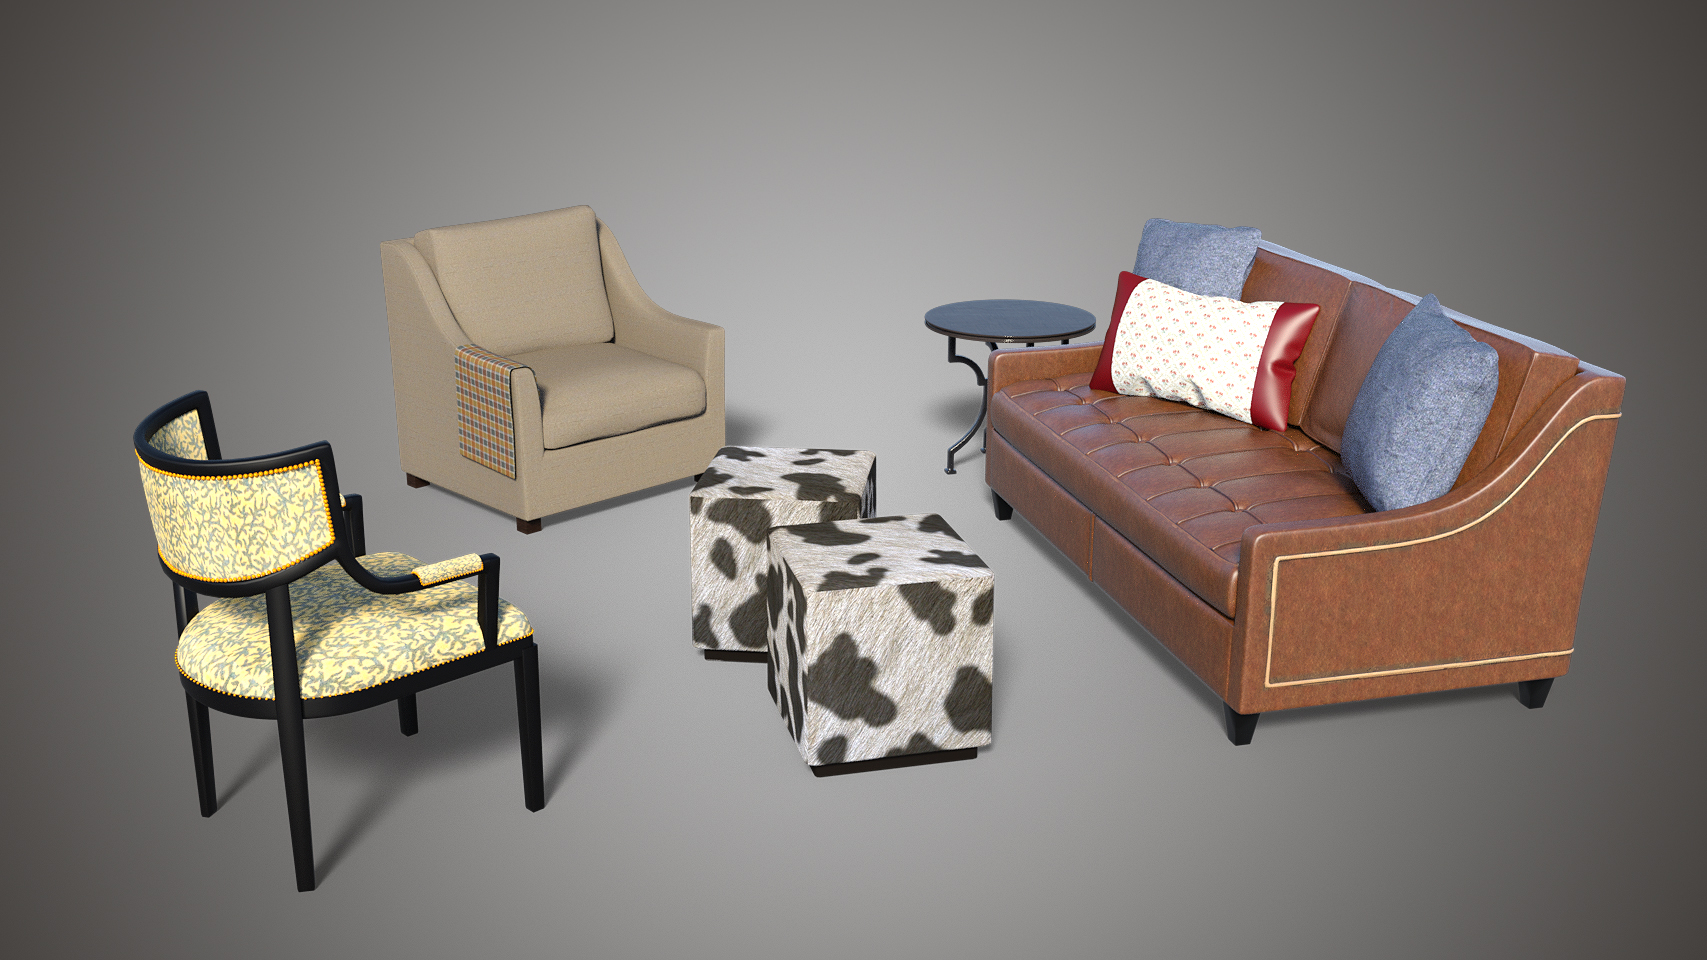 Colorado Furniture by: PerspectX, 3D Models by Daz 3D